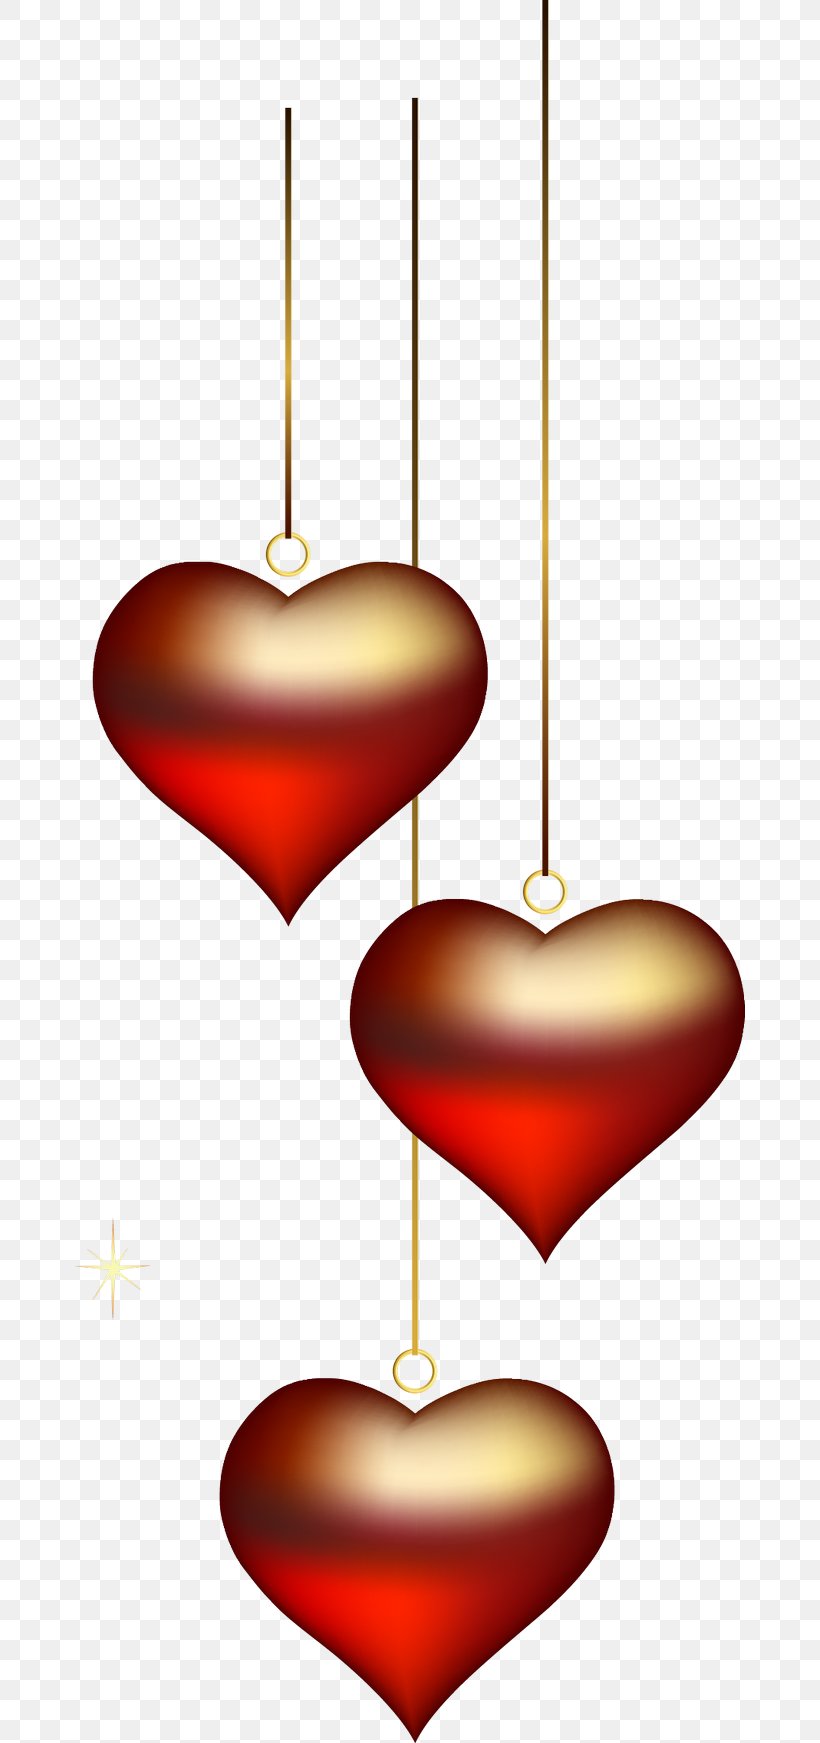 Weddings In India Clip Art, PNG, 670x1743px, Weddings In India, Document, Heart, Hindu Wedding, Symbol Download Free